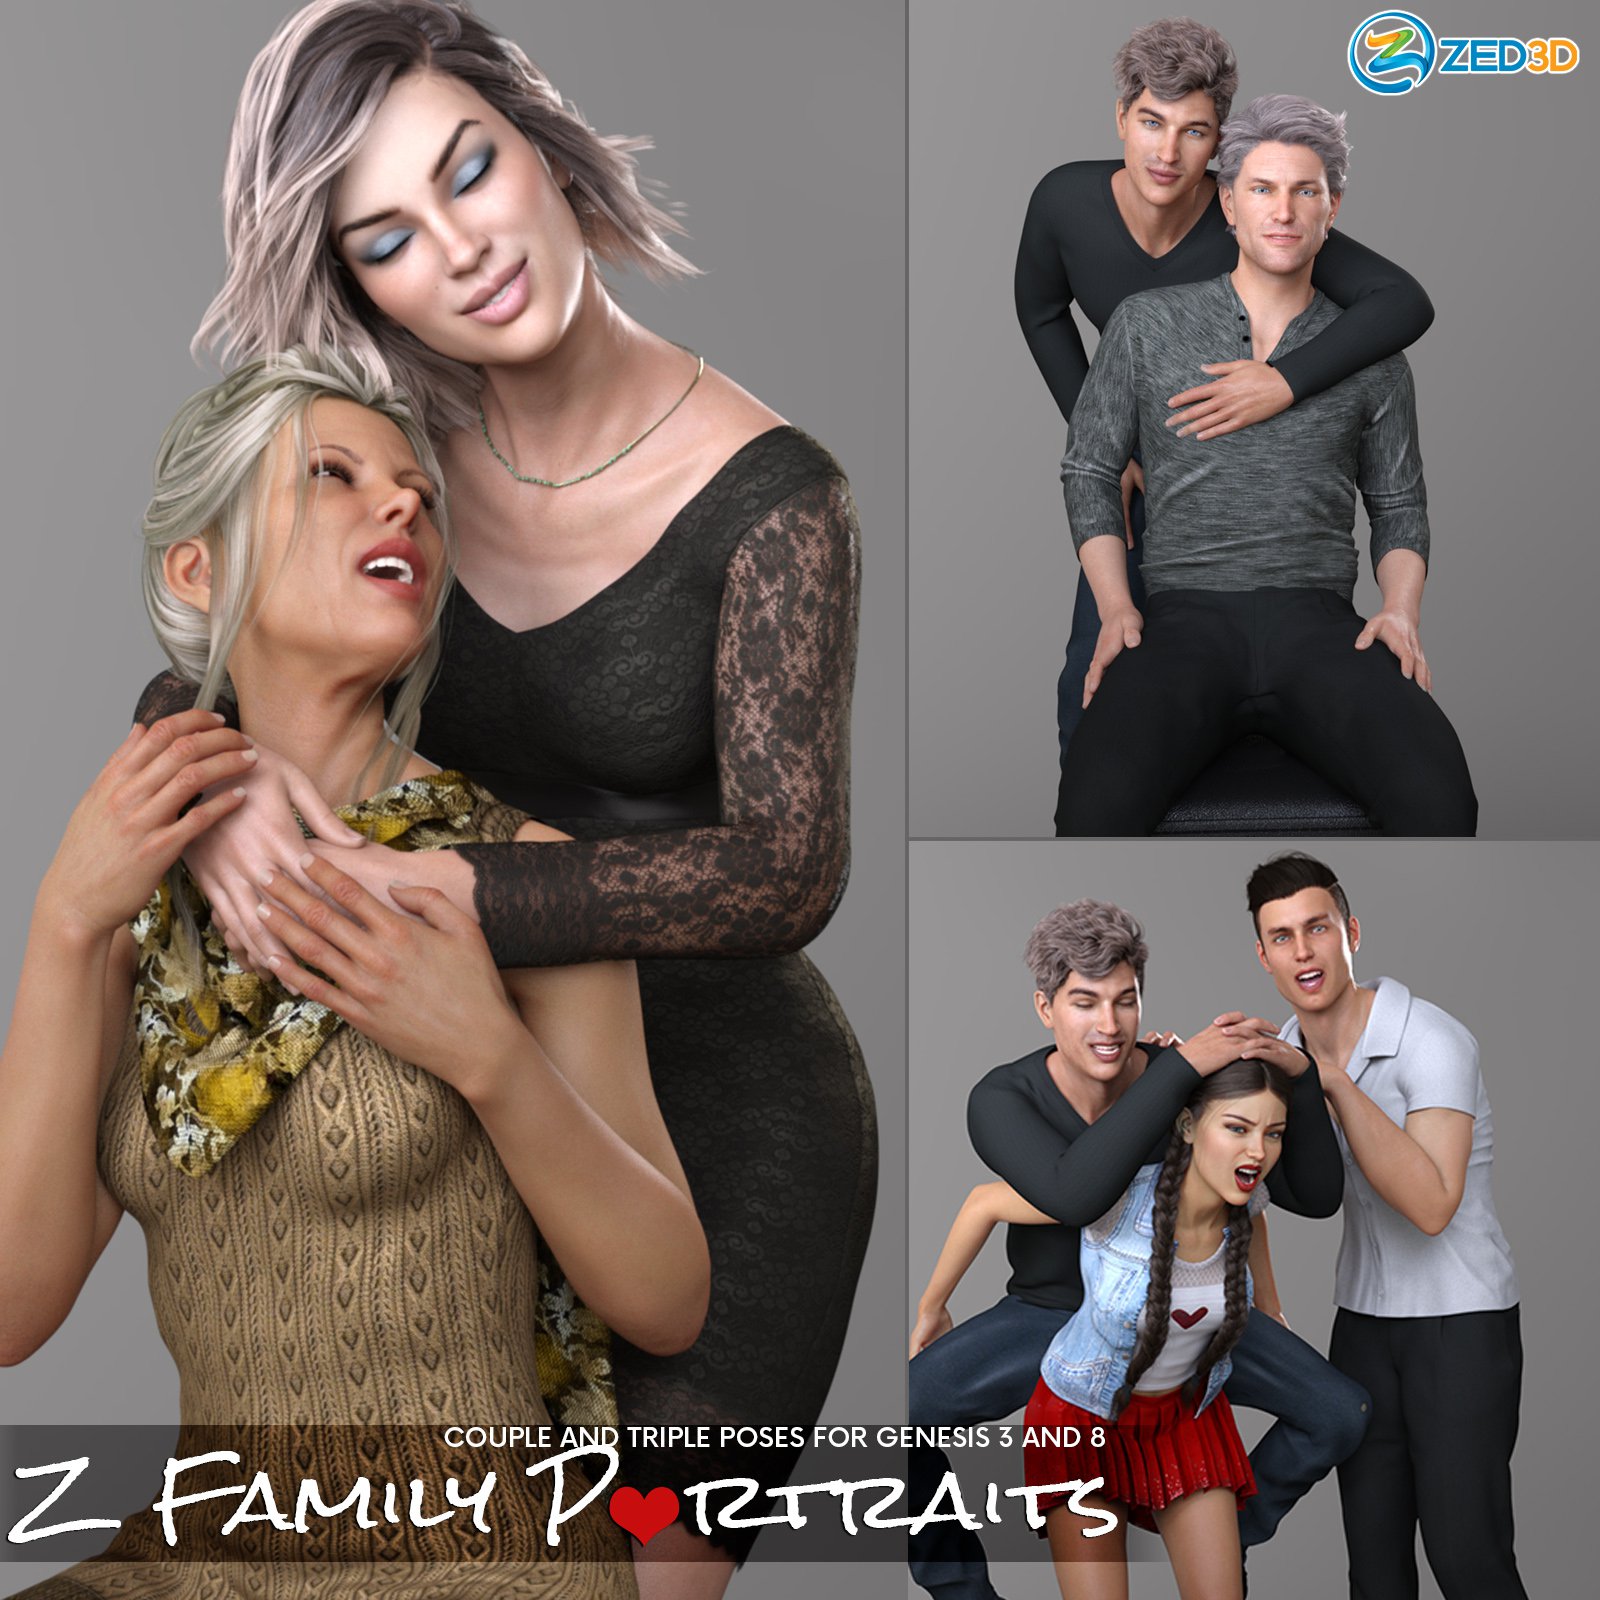 Z Family Portaits – Couple and Triple Poses for Genesis 3 and 8 Male and Female_DAZ3DDL